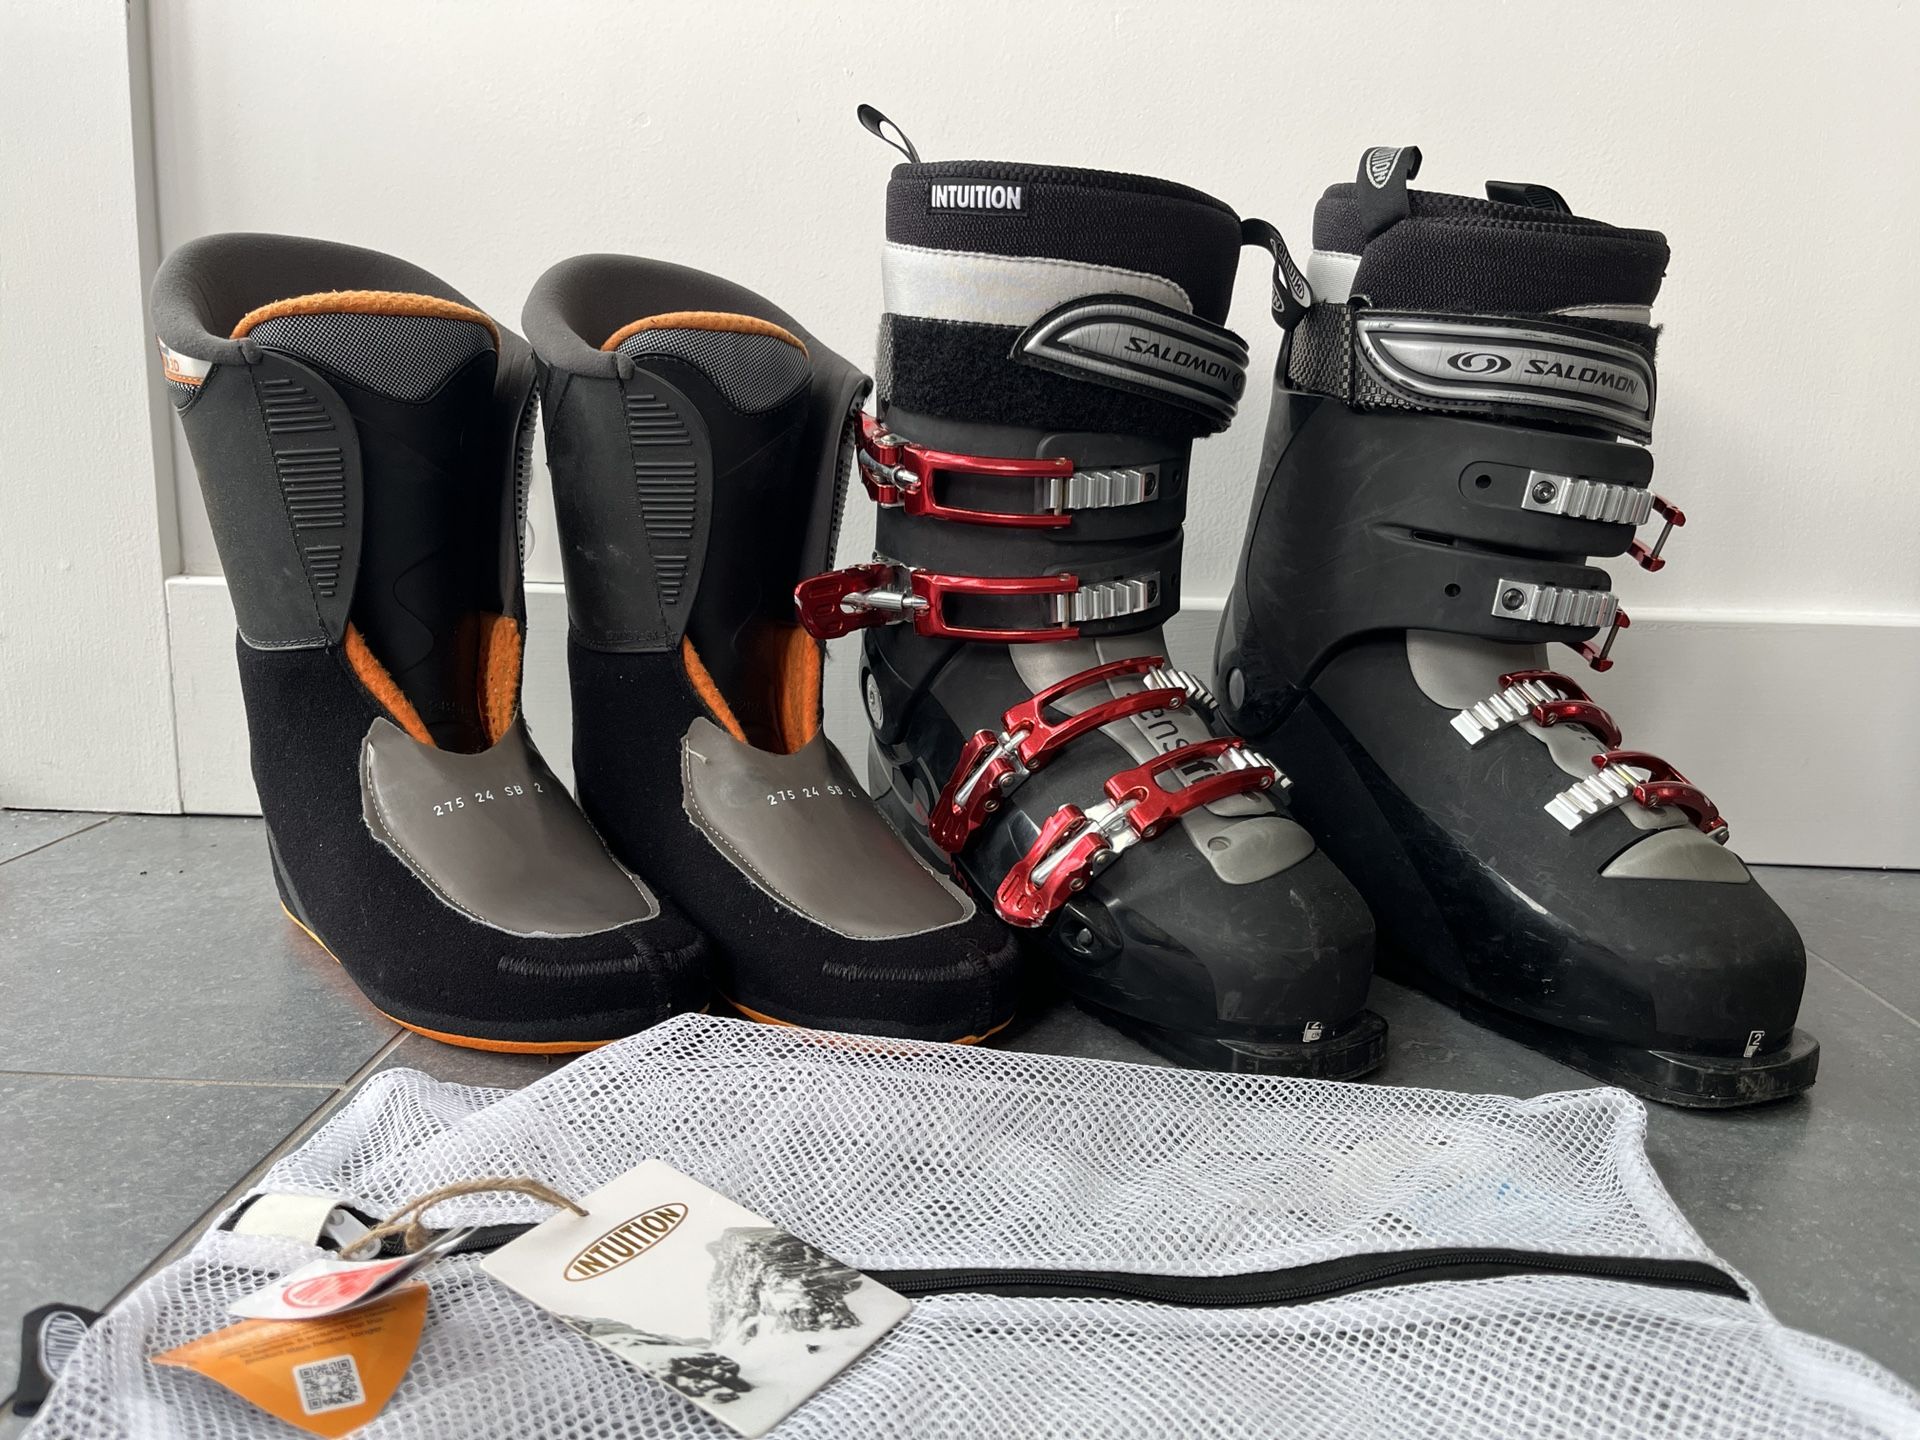 27.5 Salomon Performa 7.0 With Like New Intuition Inserts